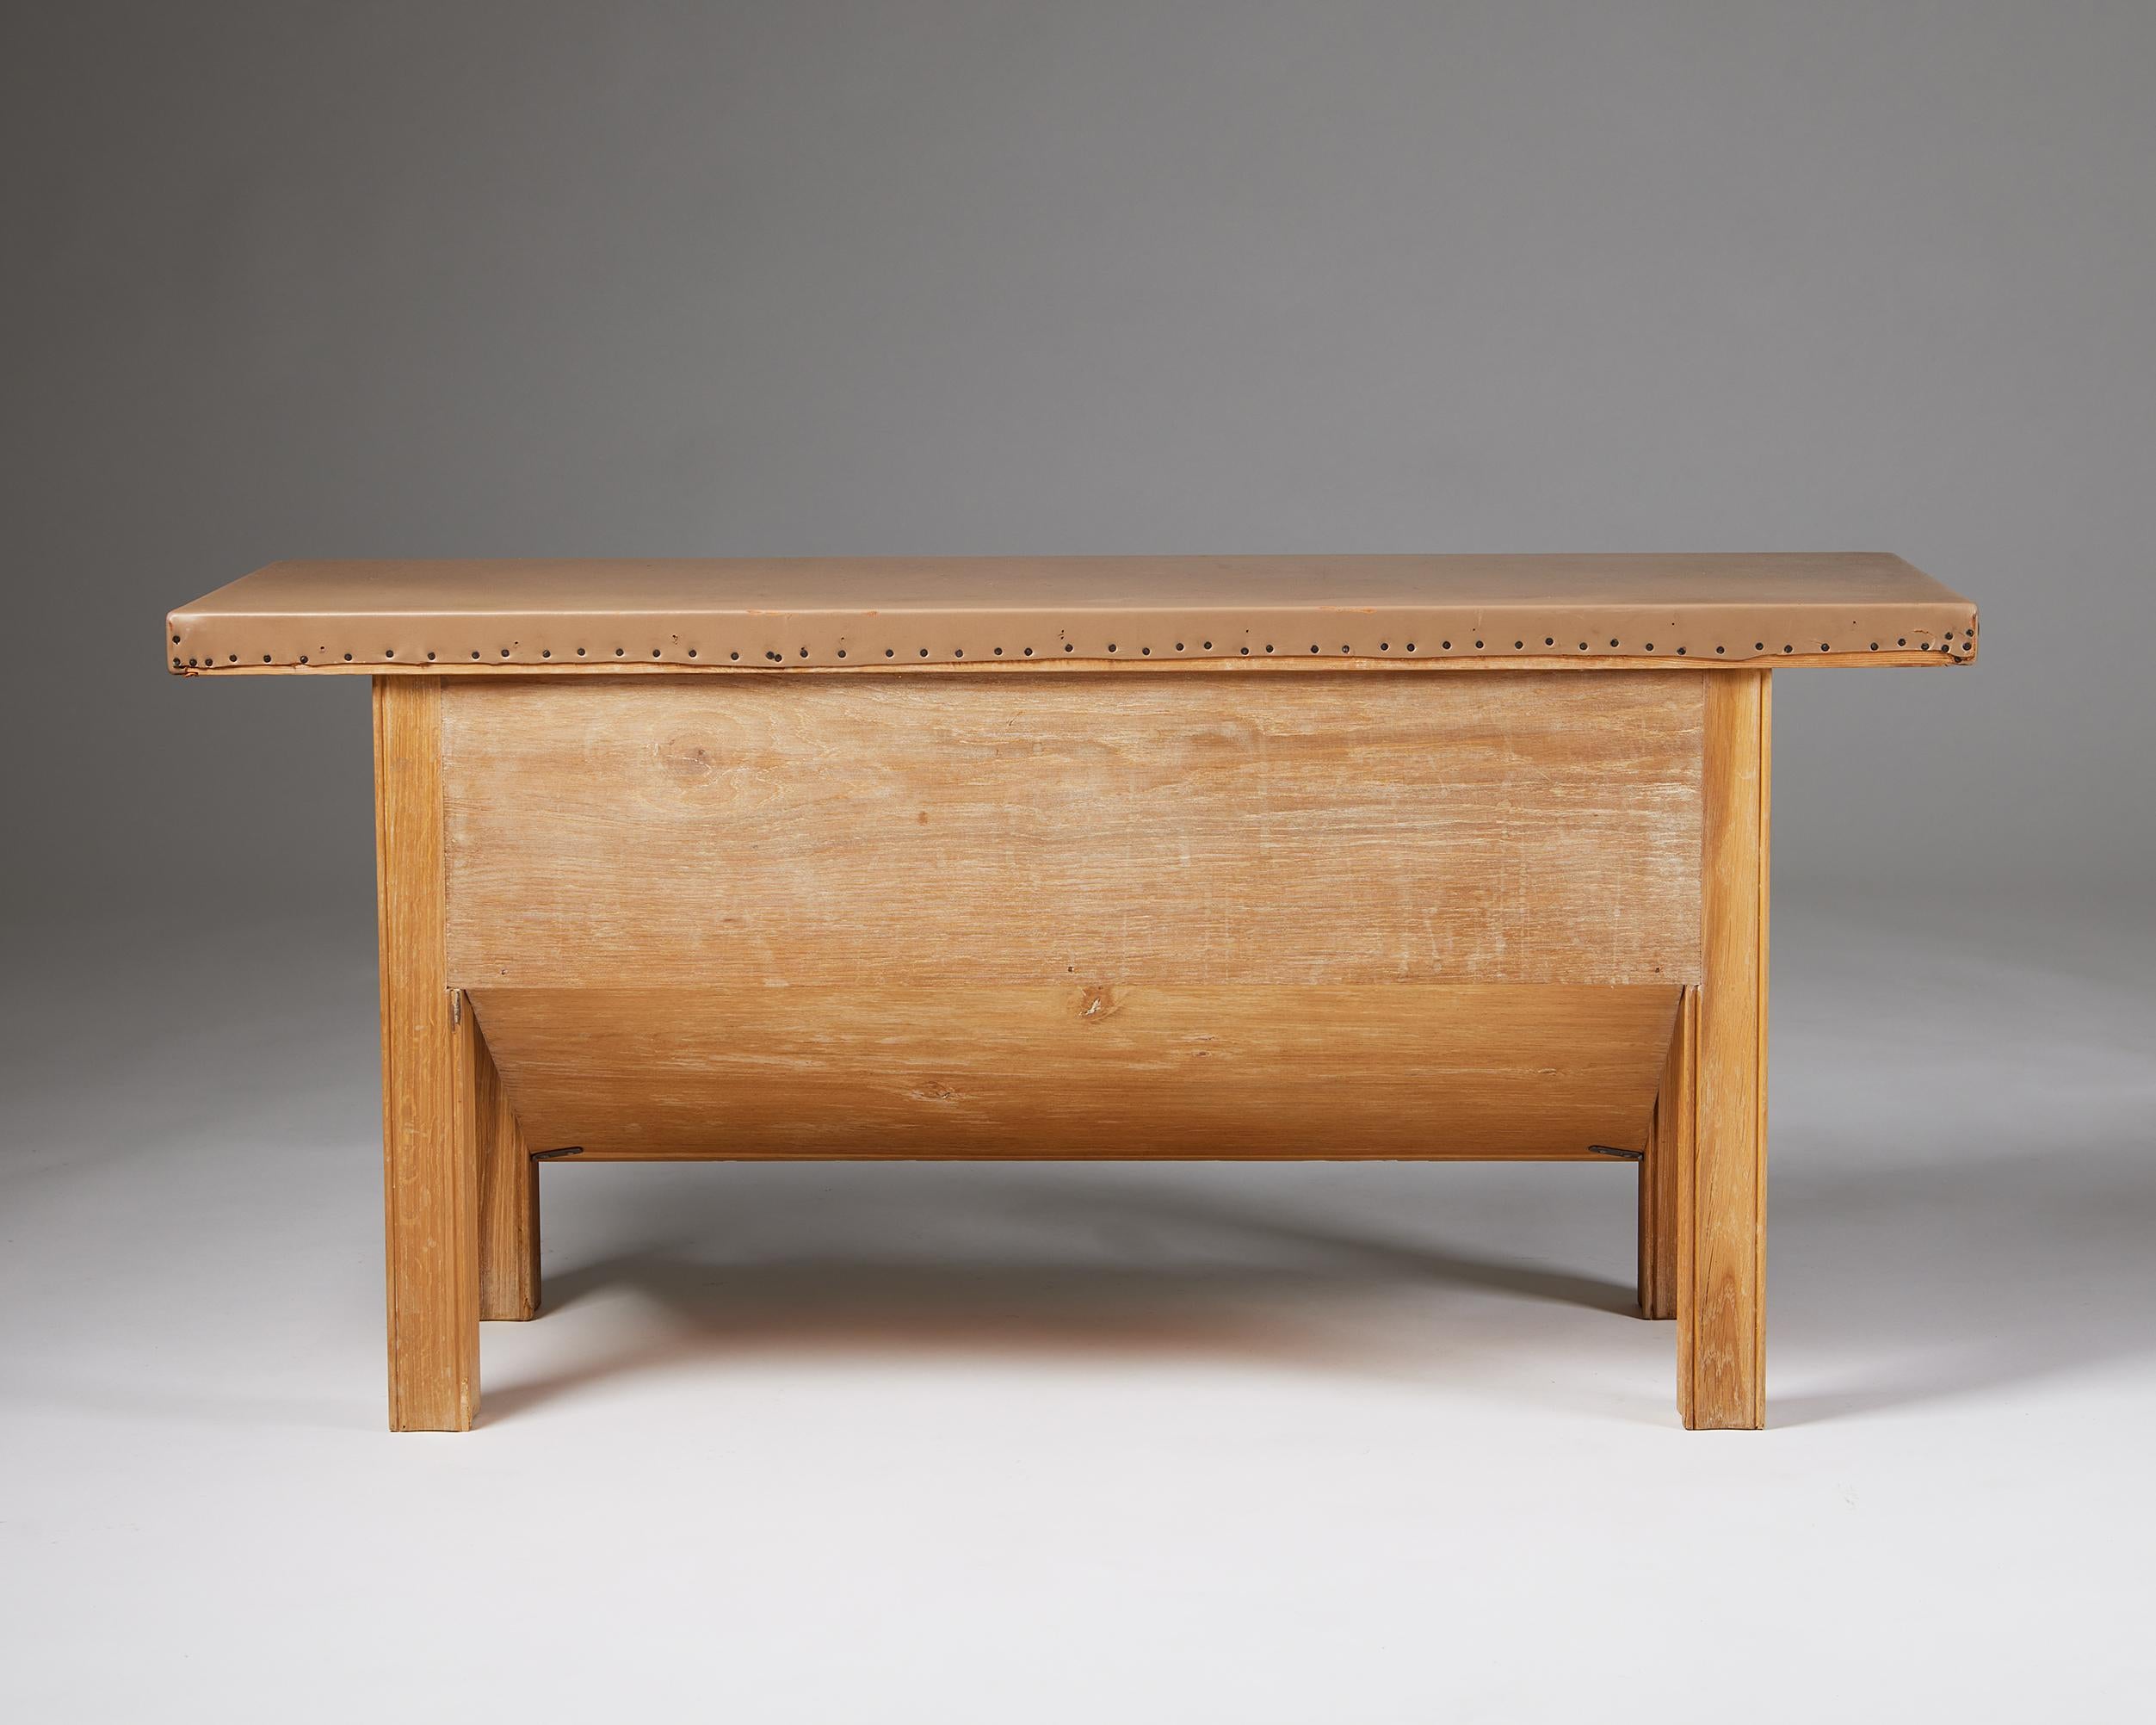 20th Century Sideboard Attributed to Axel Einar Hjorth for Nk, Sweden, 1940s For Sale